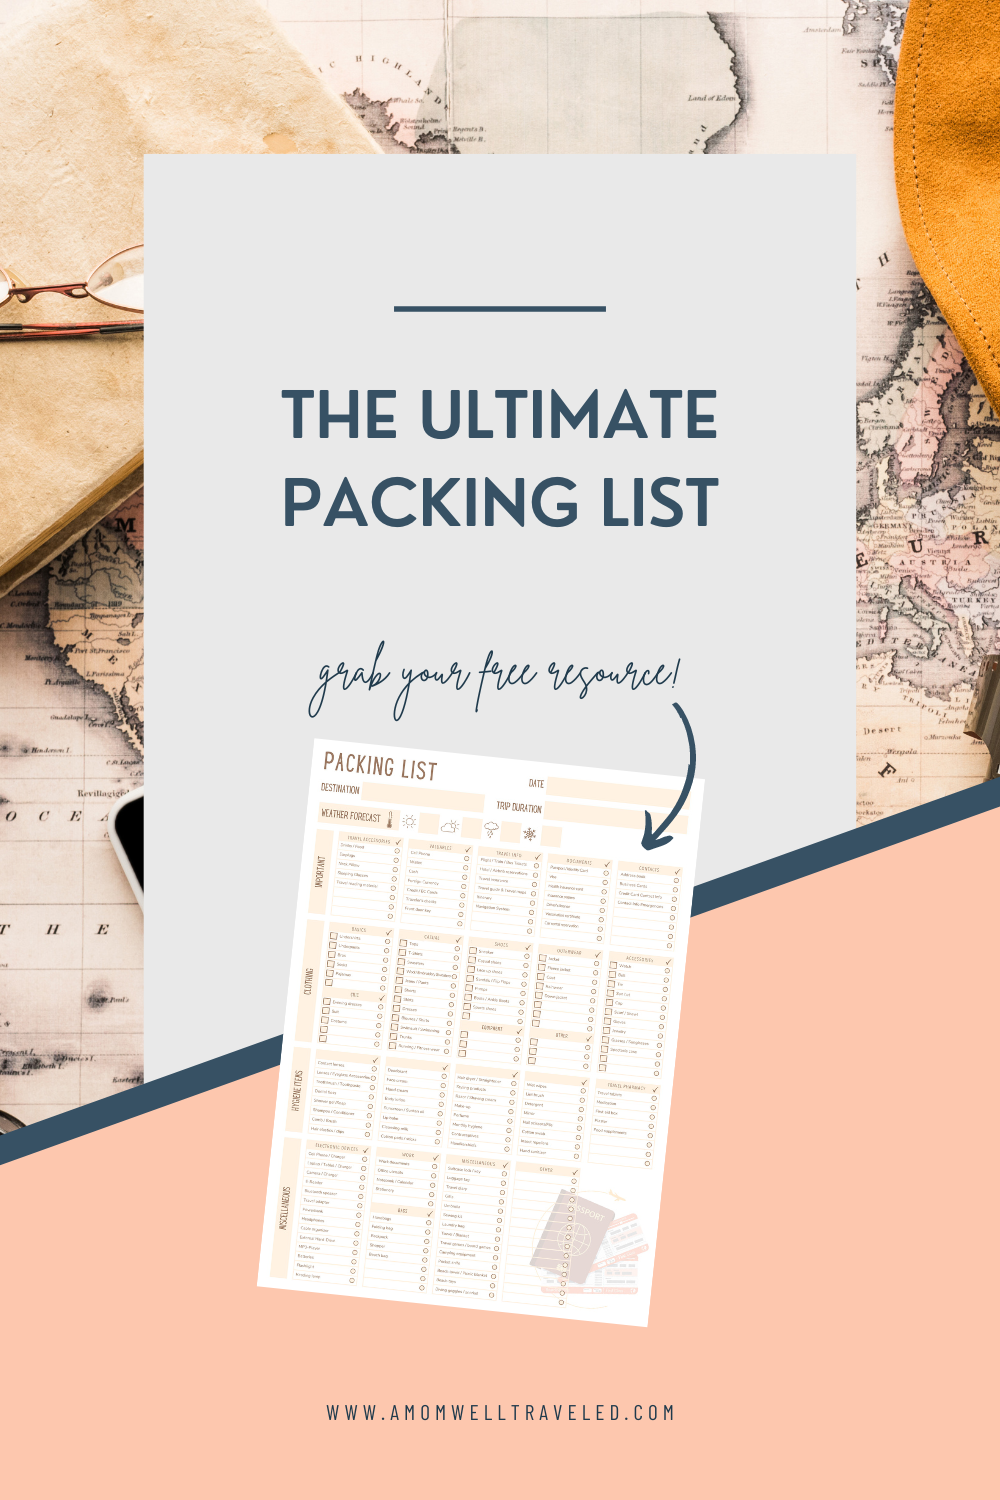 Visual for a free download for the ultimate packing list